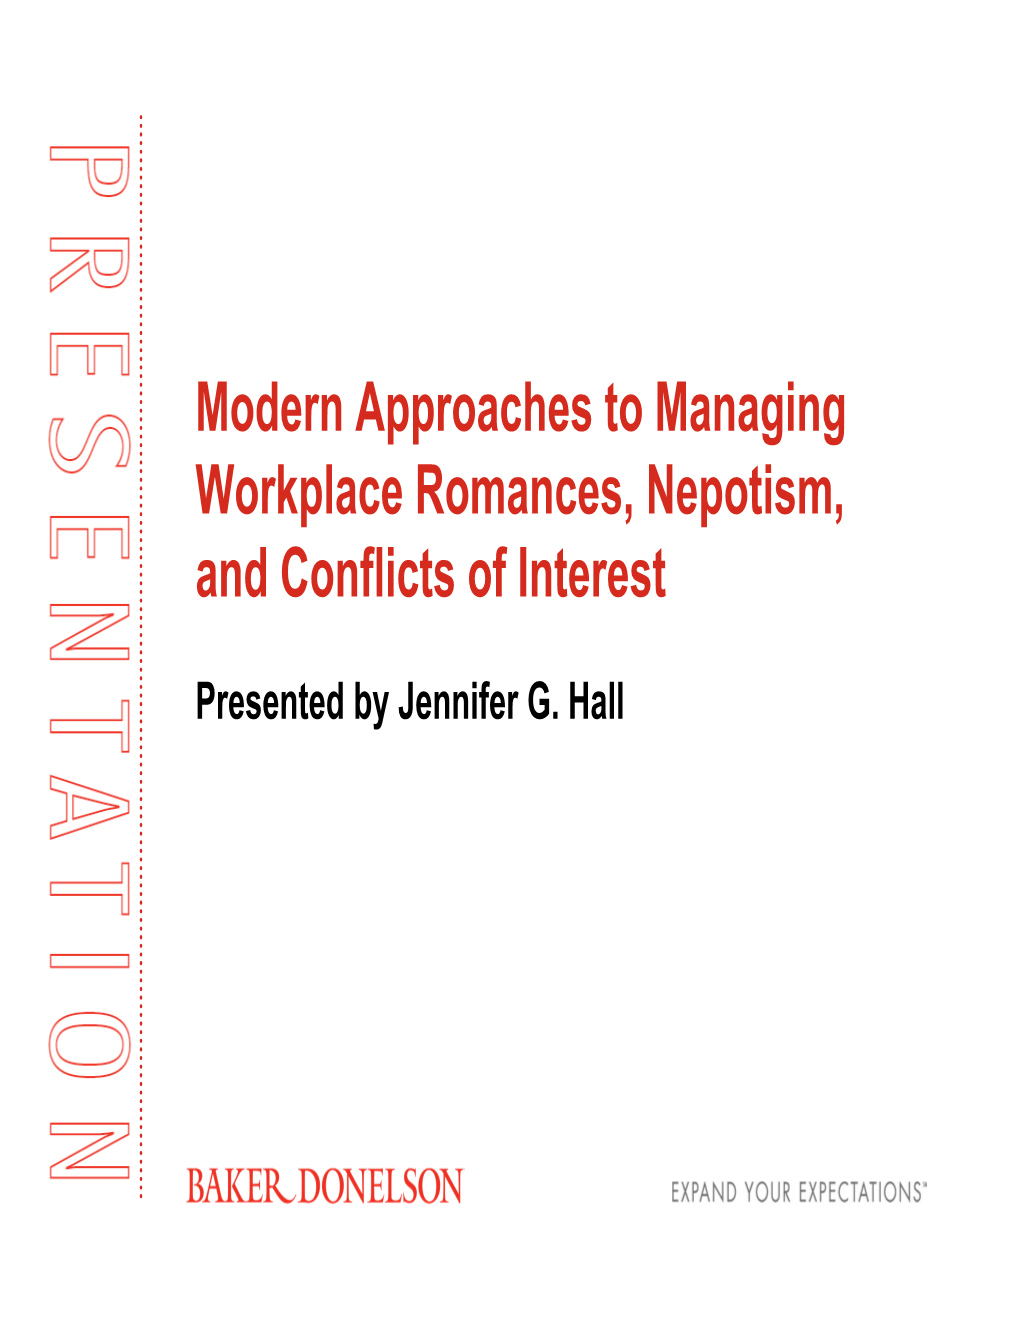 Modern Approaches to Managing Workplace Romances, Nepotism, and Conflicts of Interest